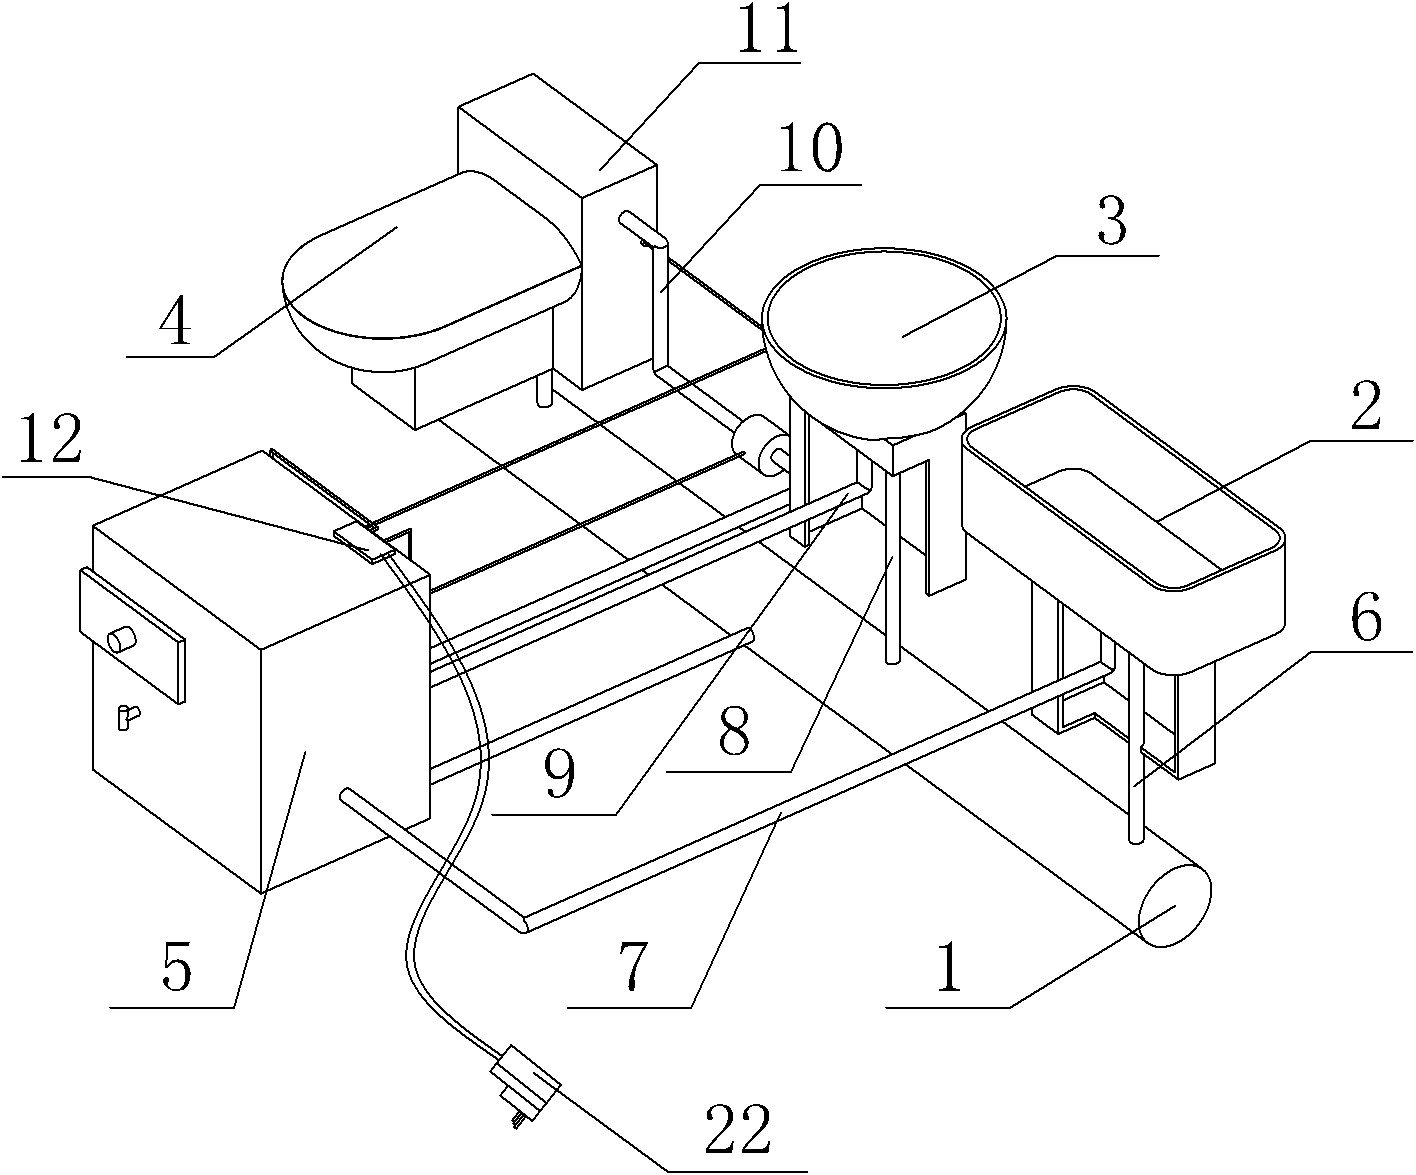 Method and device for sewage reutilization